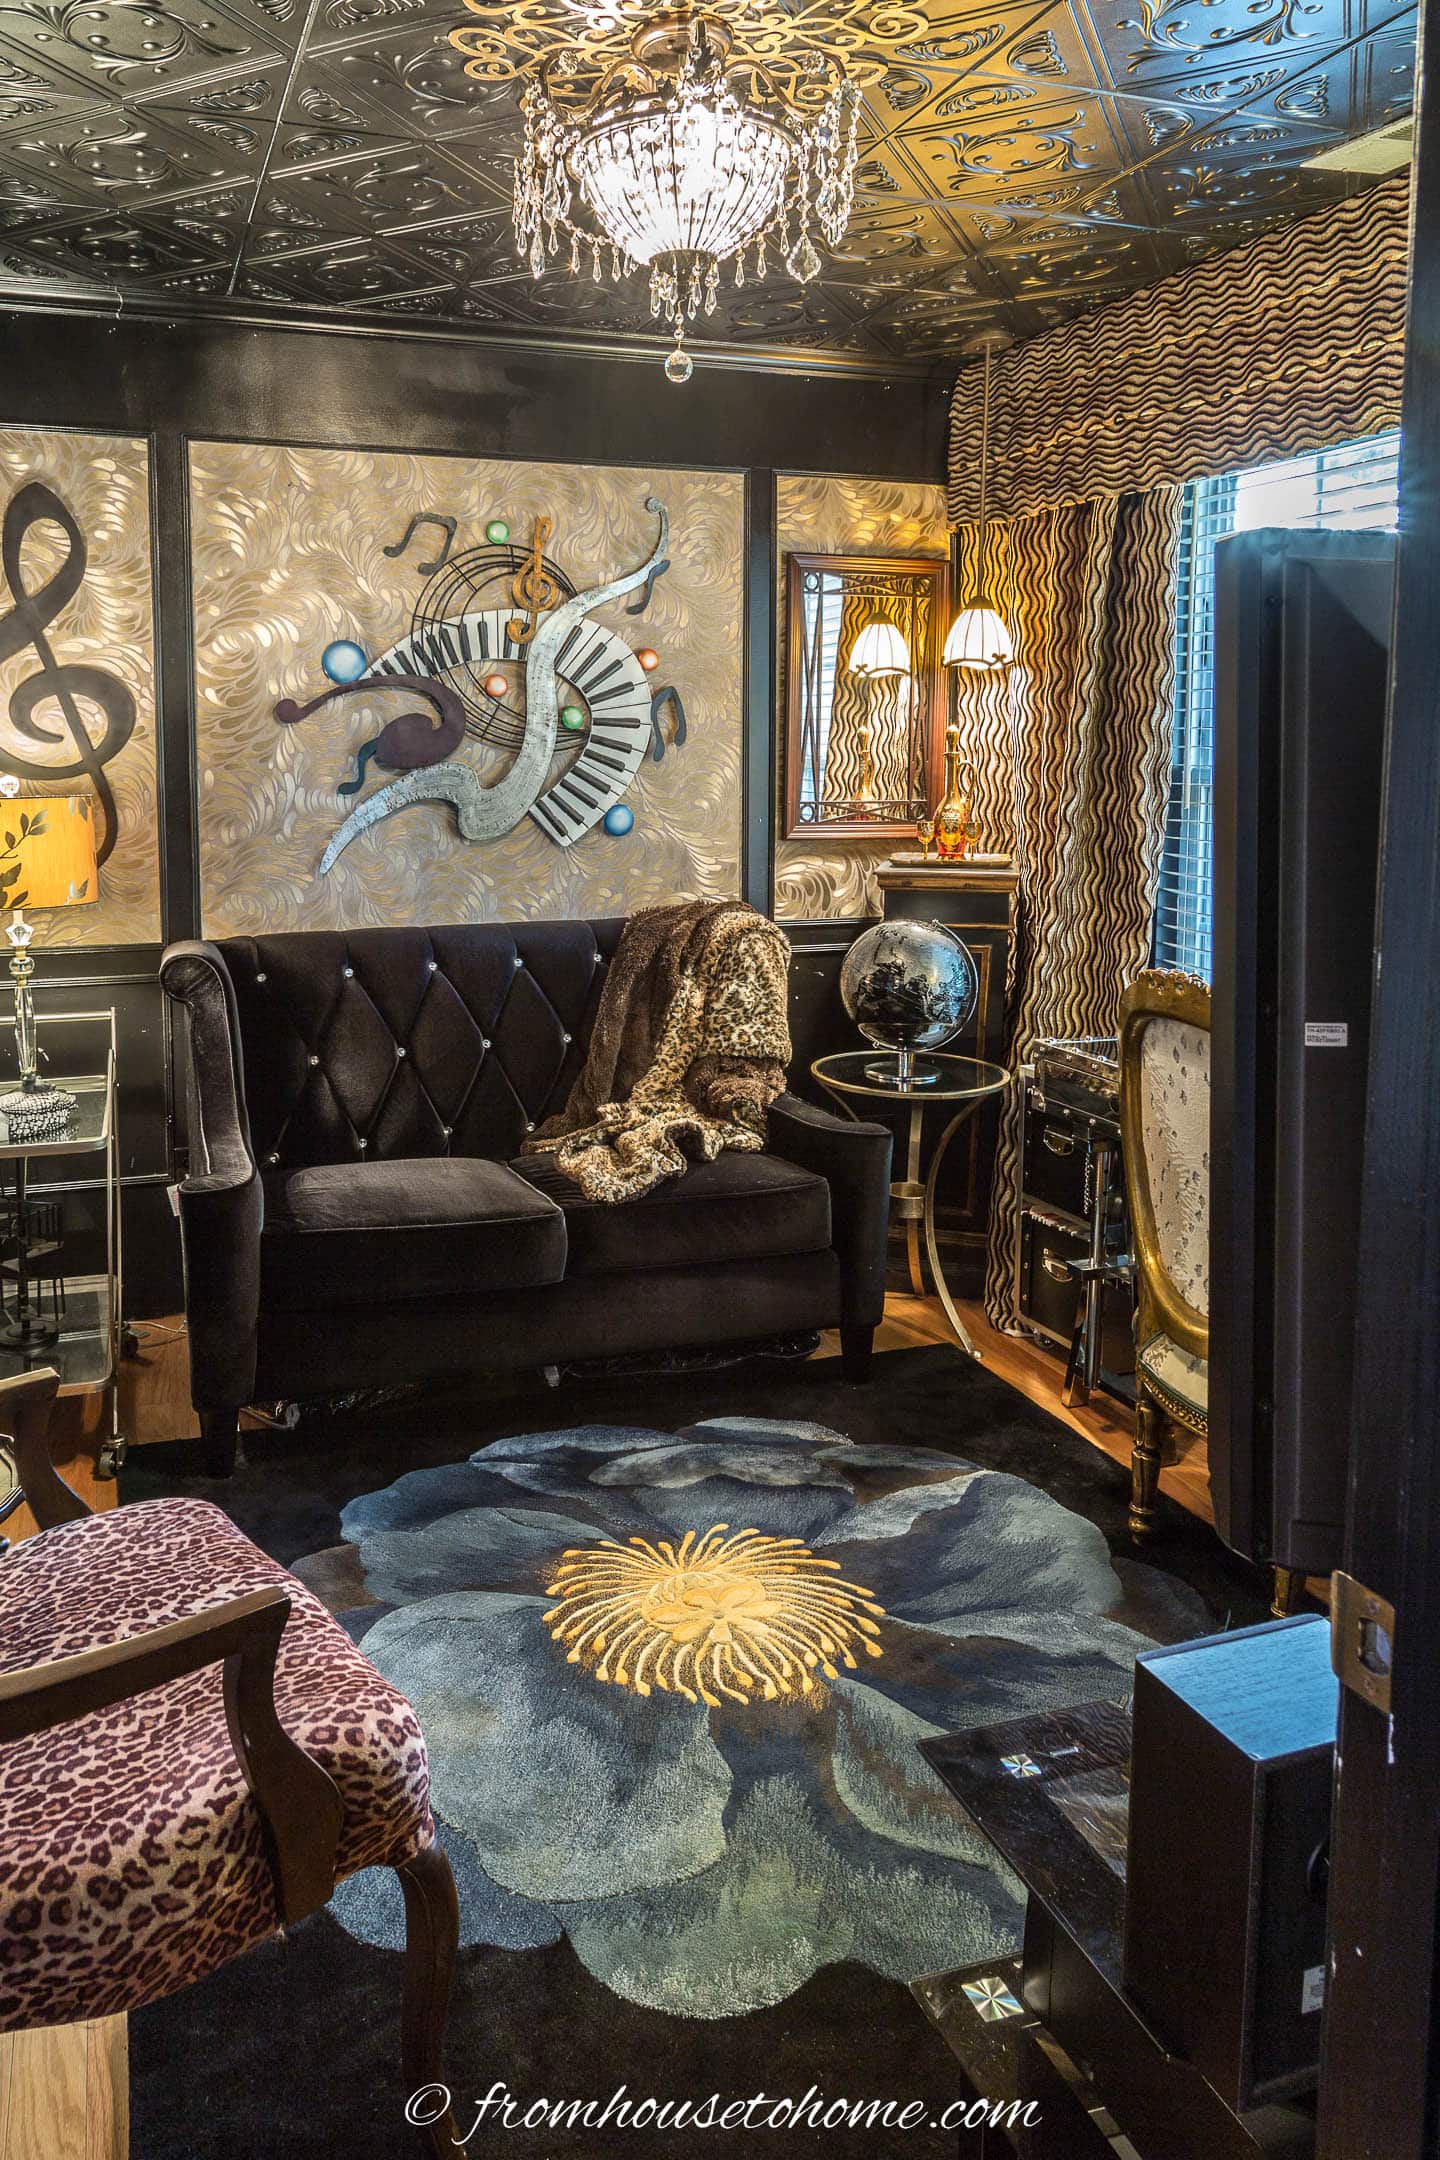 Den with black walls and ceiling as well as gold wall-paper inserts